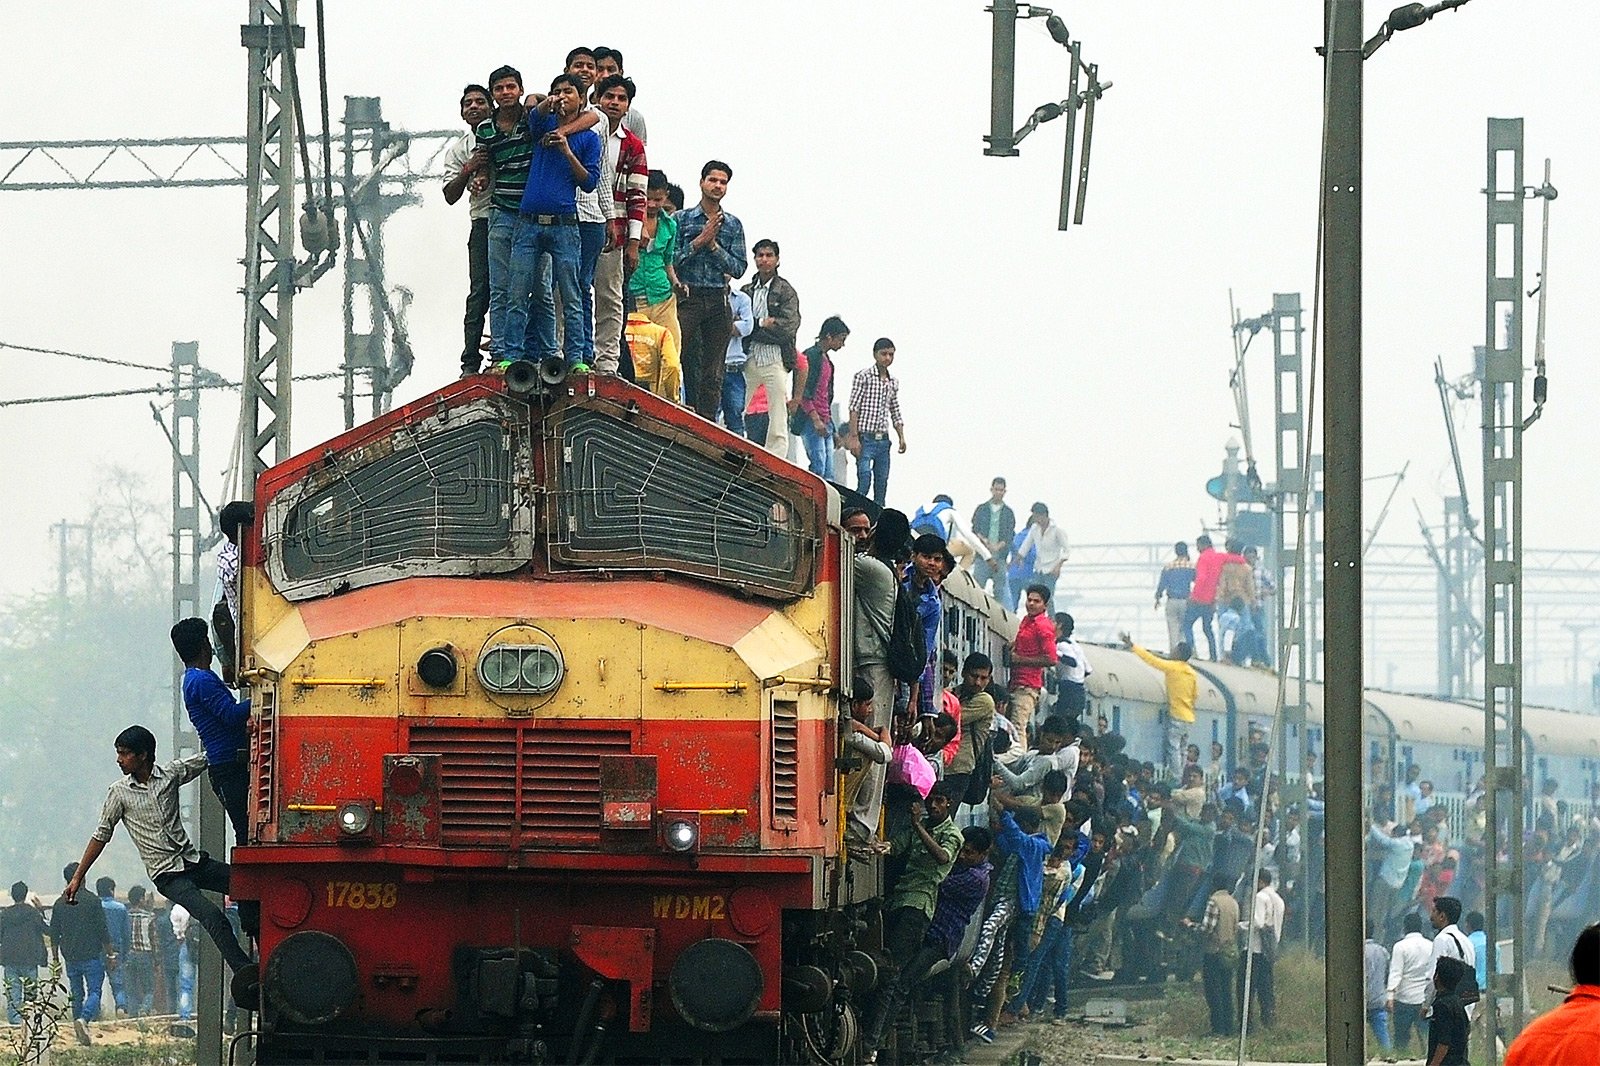 How to ride on the roof of a train in Mumbai